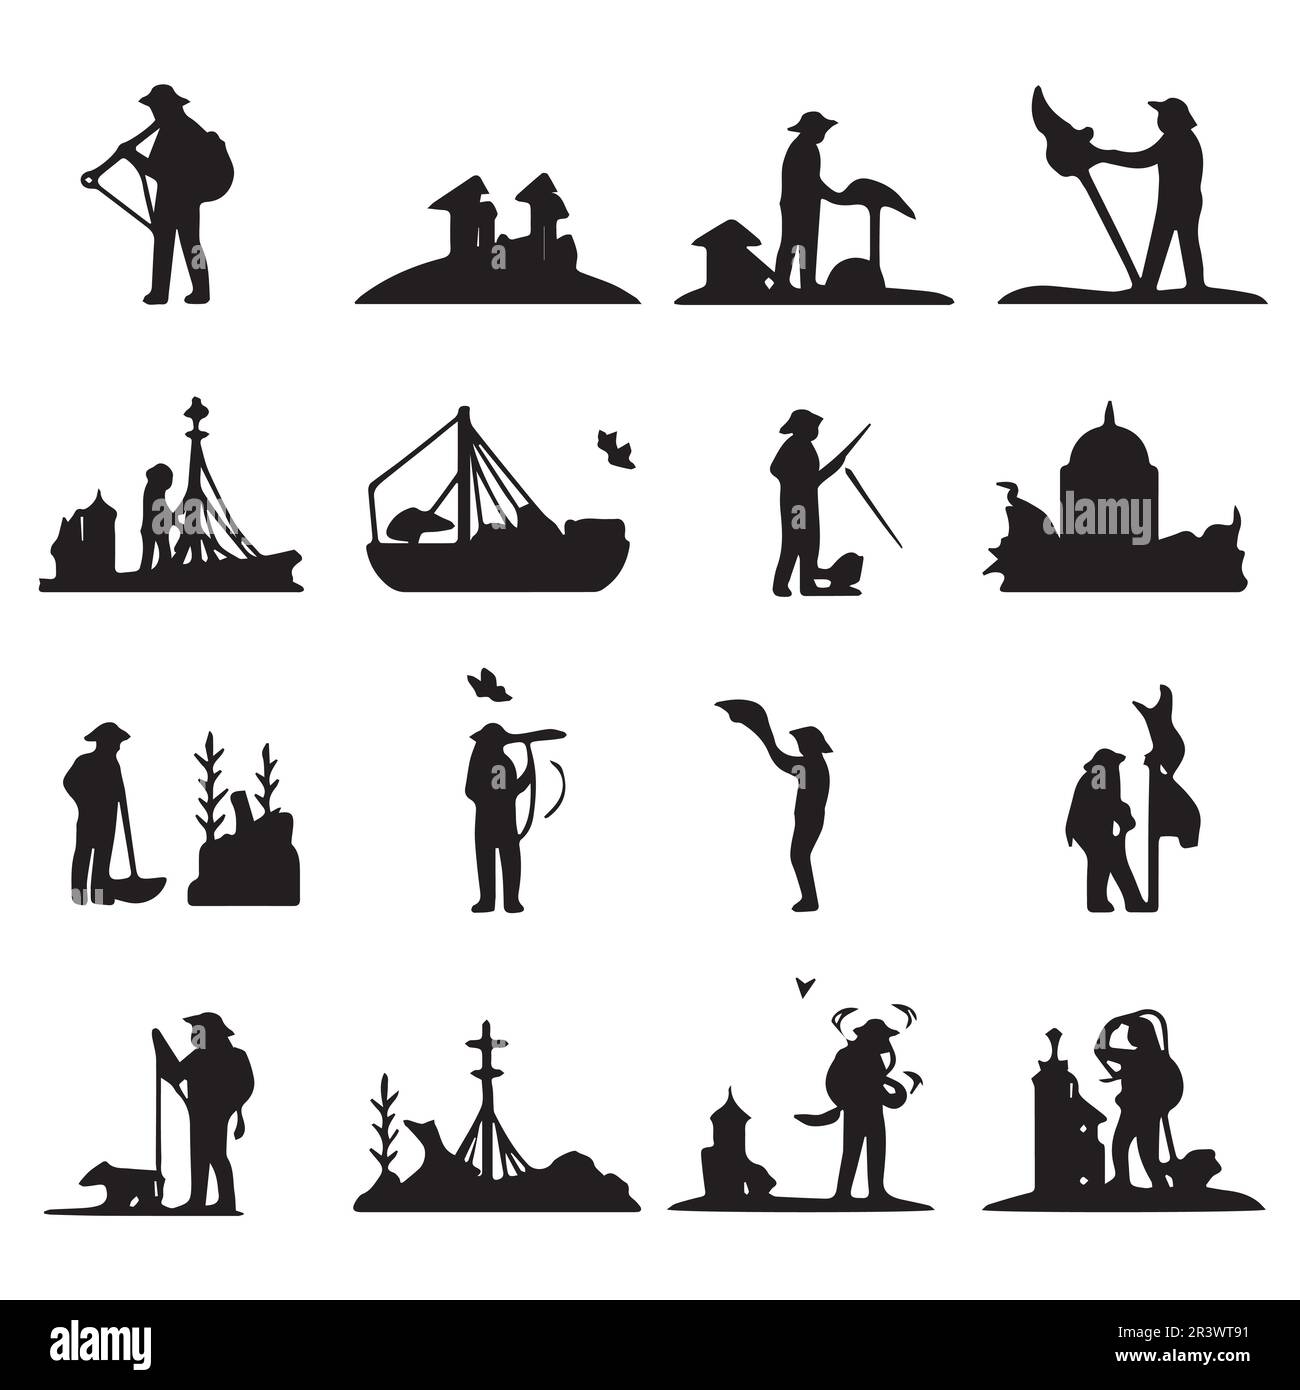 Silhouettes of people working on a boat and a tower vector. Stock Vector